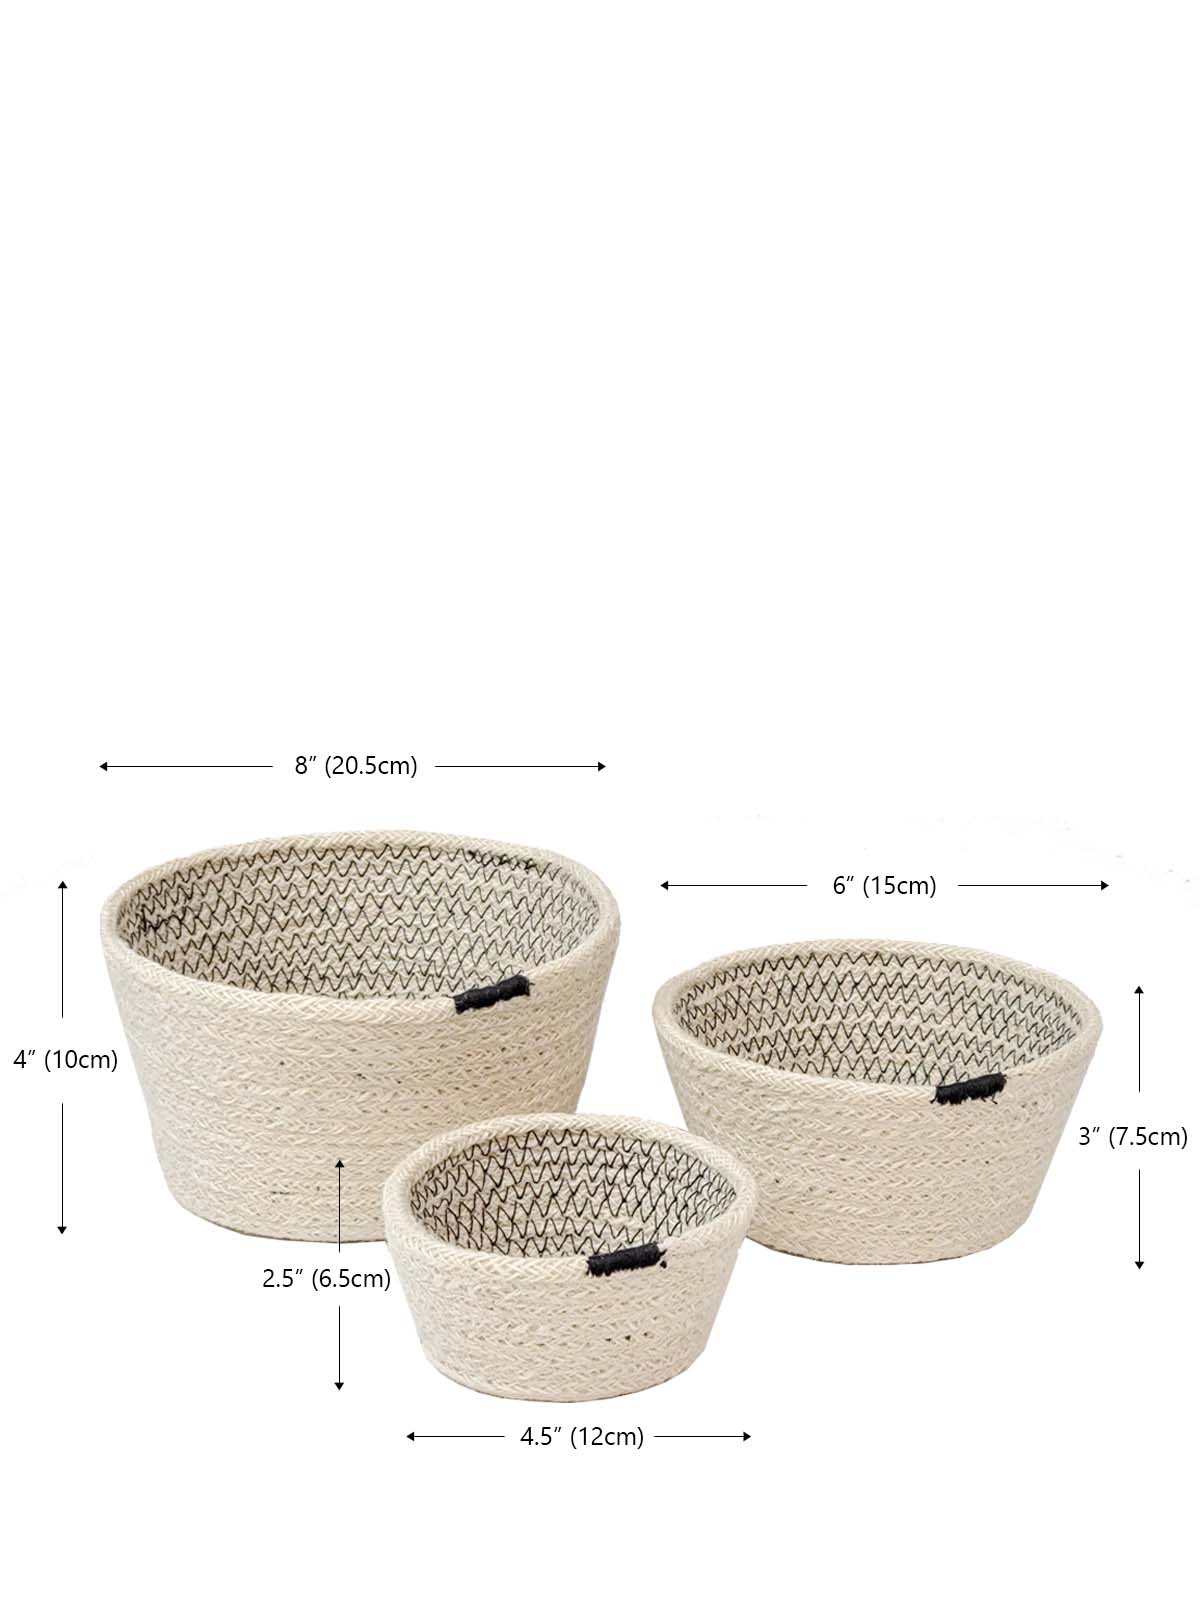 Minimalistic Amari Bowl - Black (Set of 3) go with everything, everywhere in your space!